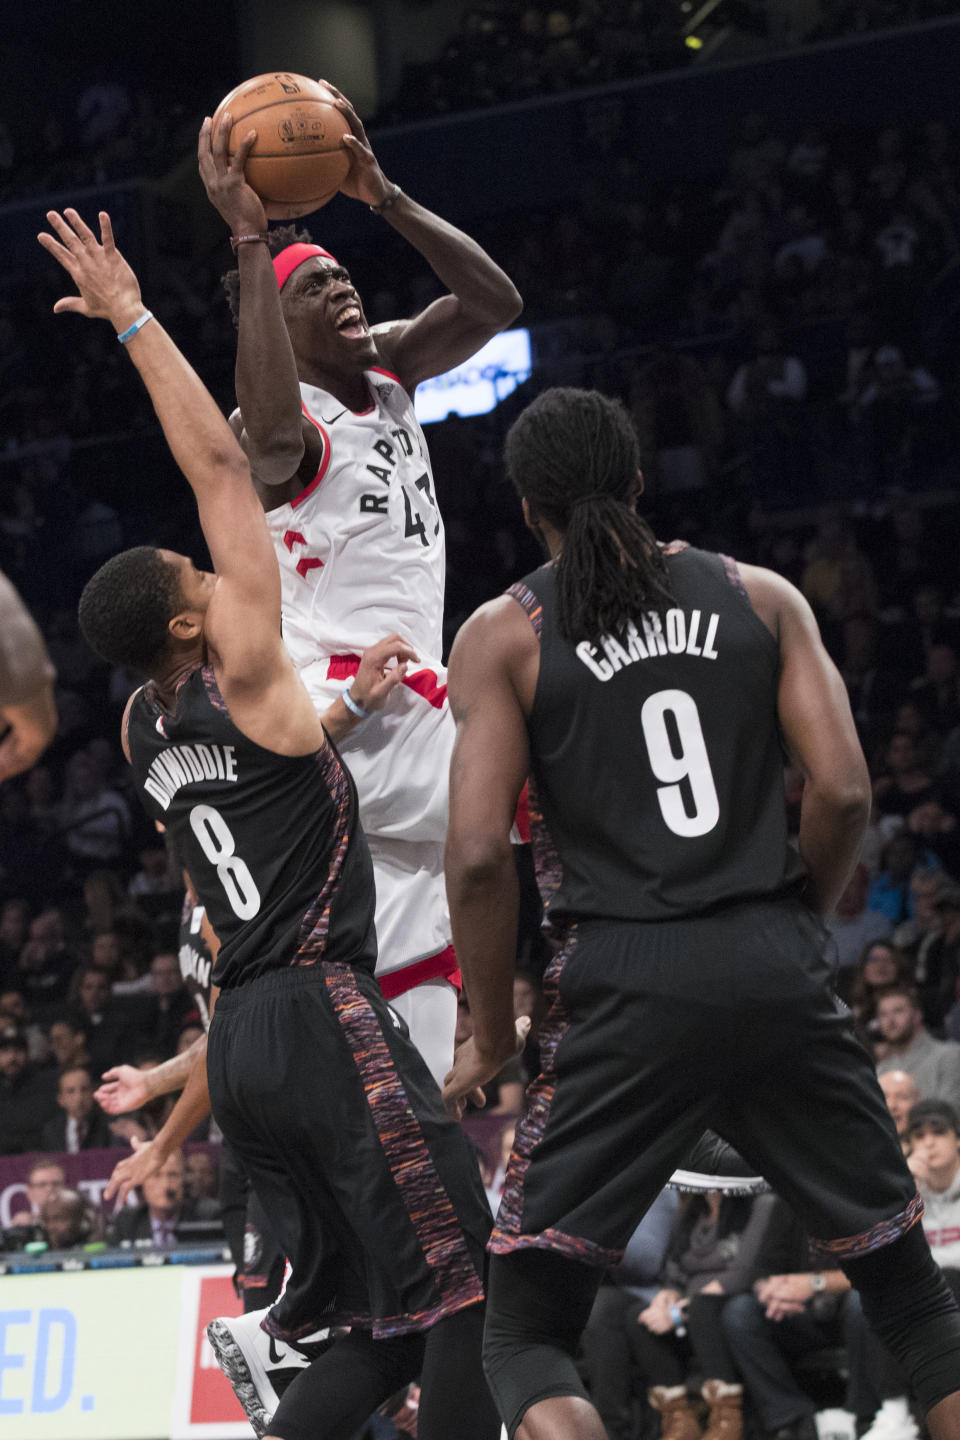 Toronto Raptors forward Pascal Siakam (43) goes to the basket against Brooklyn Nets guard Spencer Dinwiddie (8) and forward DeMarre Carroll (9) during the first half of an NBA basketball game, Friday, Dec. 7, 2018, in New York. (AP Photo/Mary Altaffer)